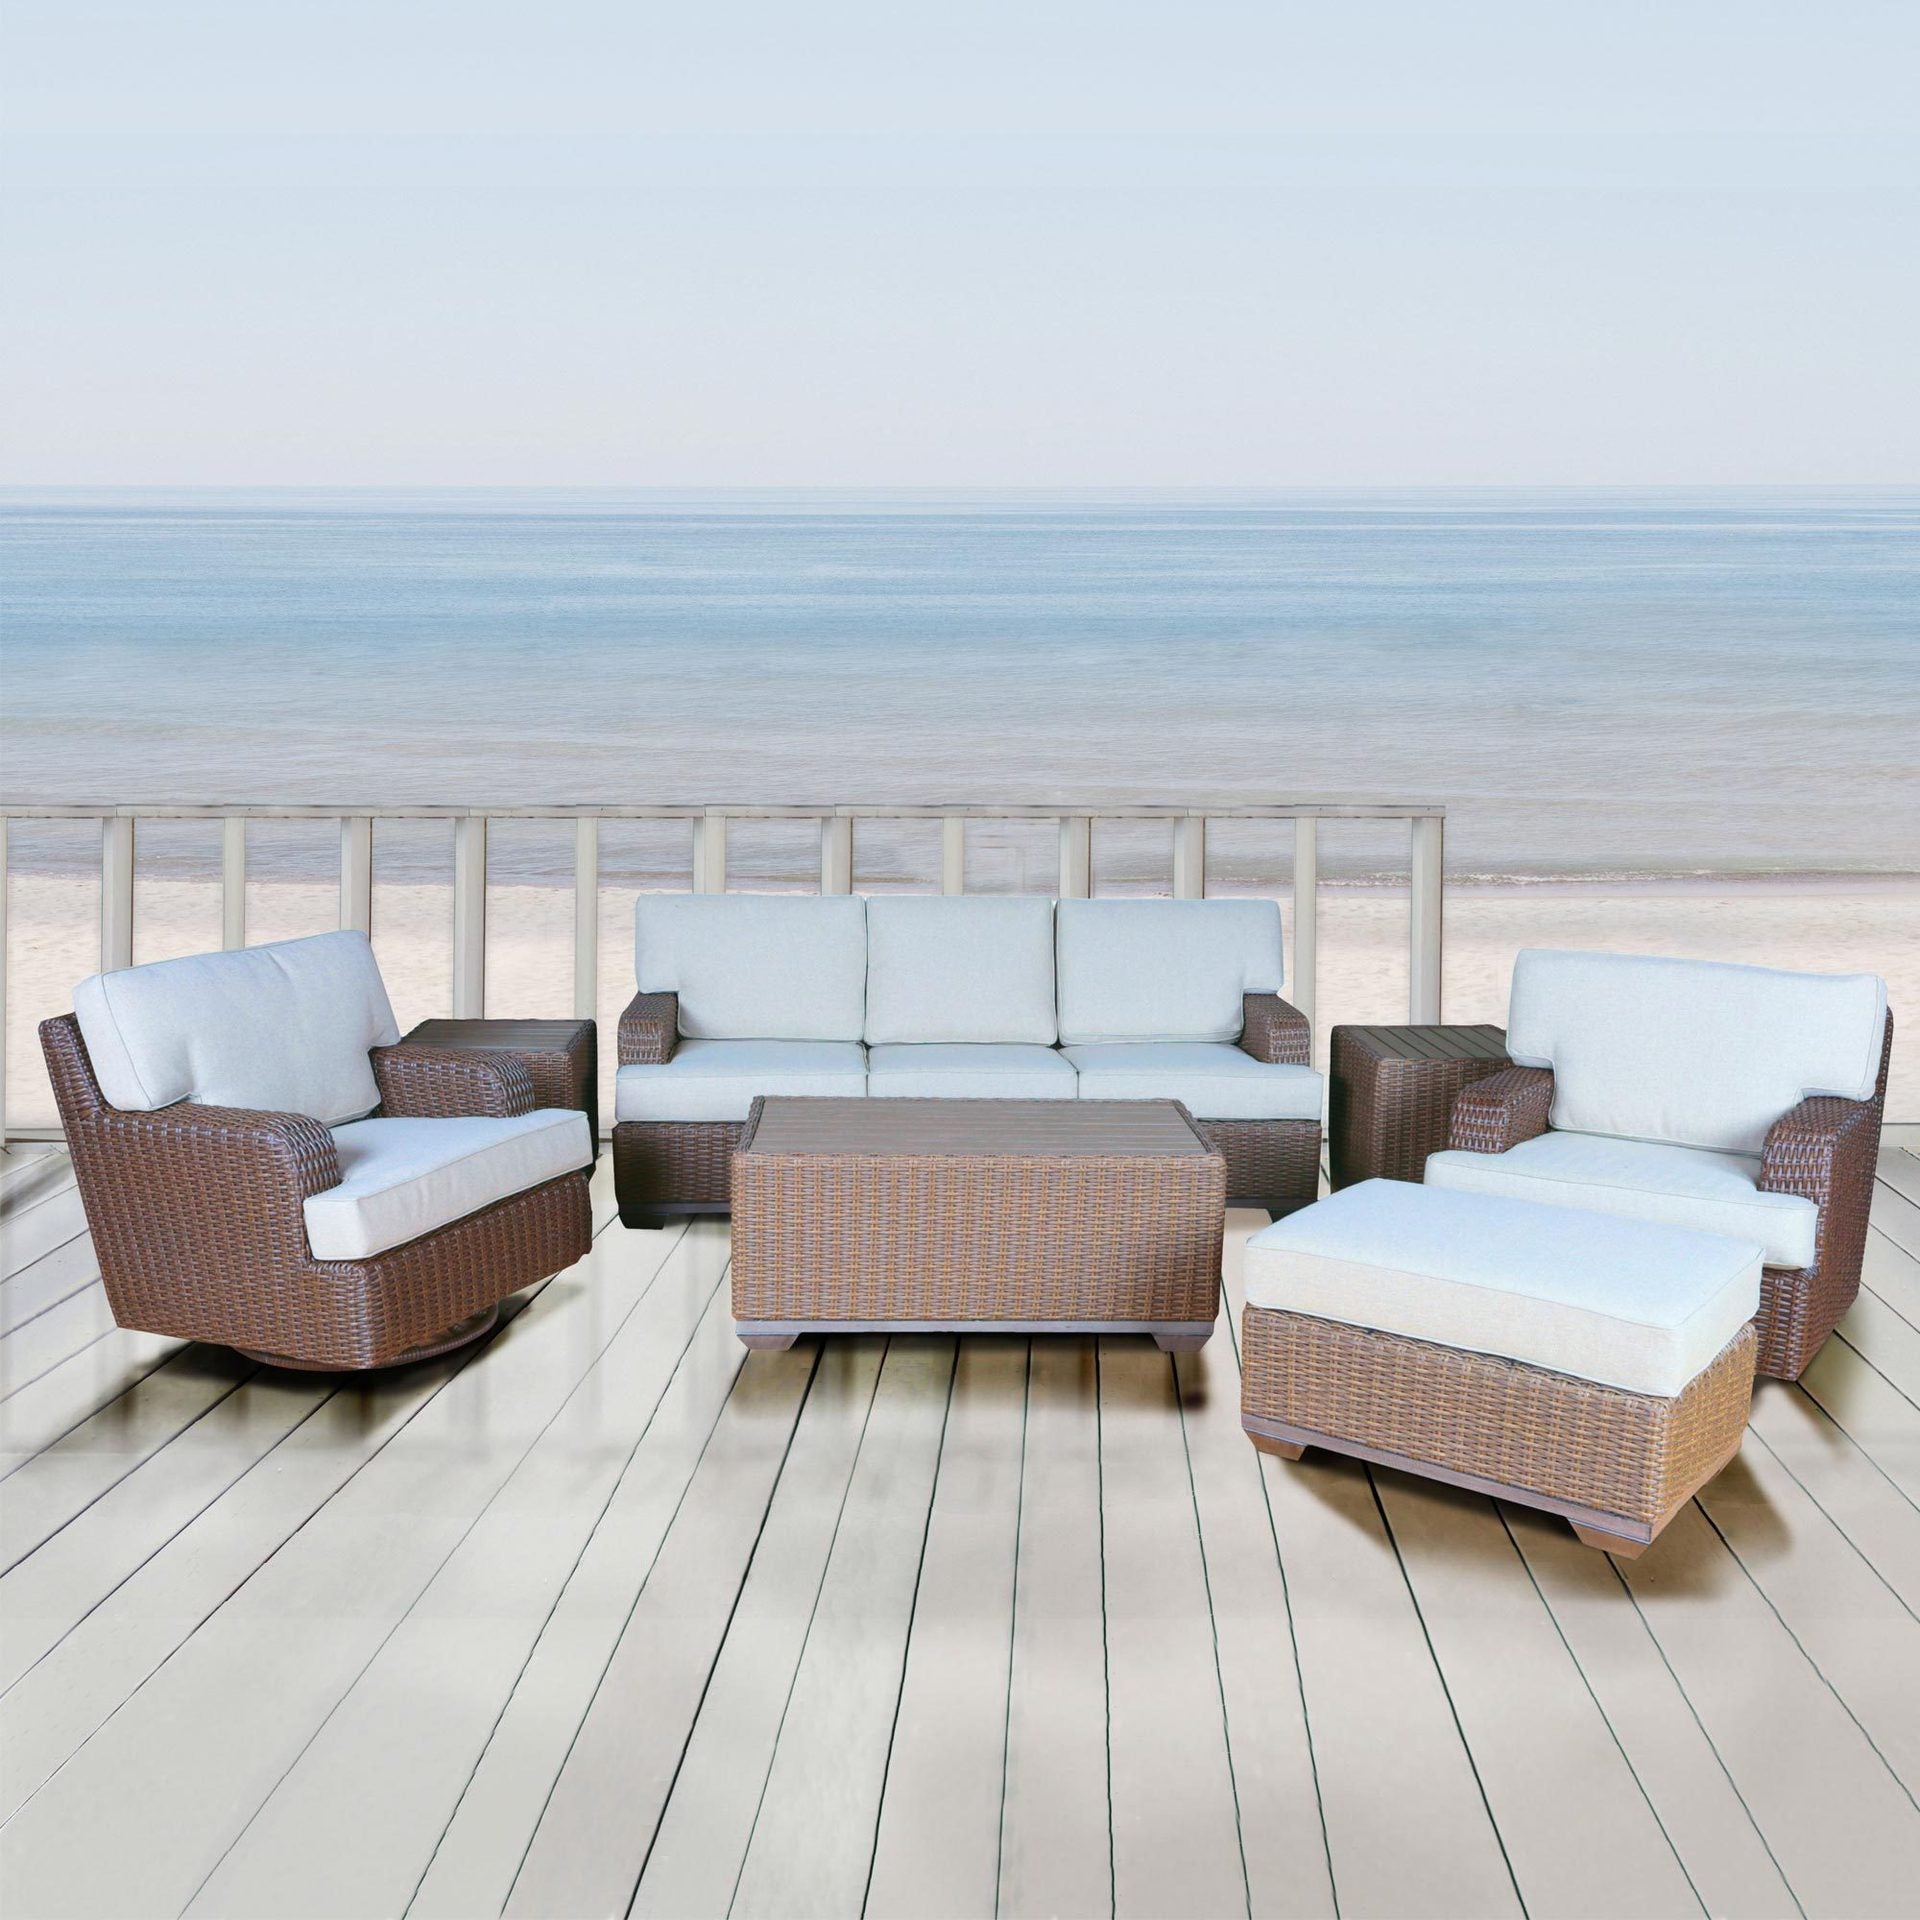 5 Tips for Choosing the Best Outdoor Furniture for Your Home